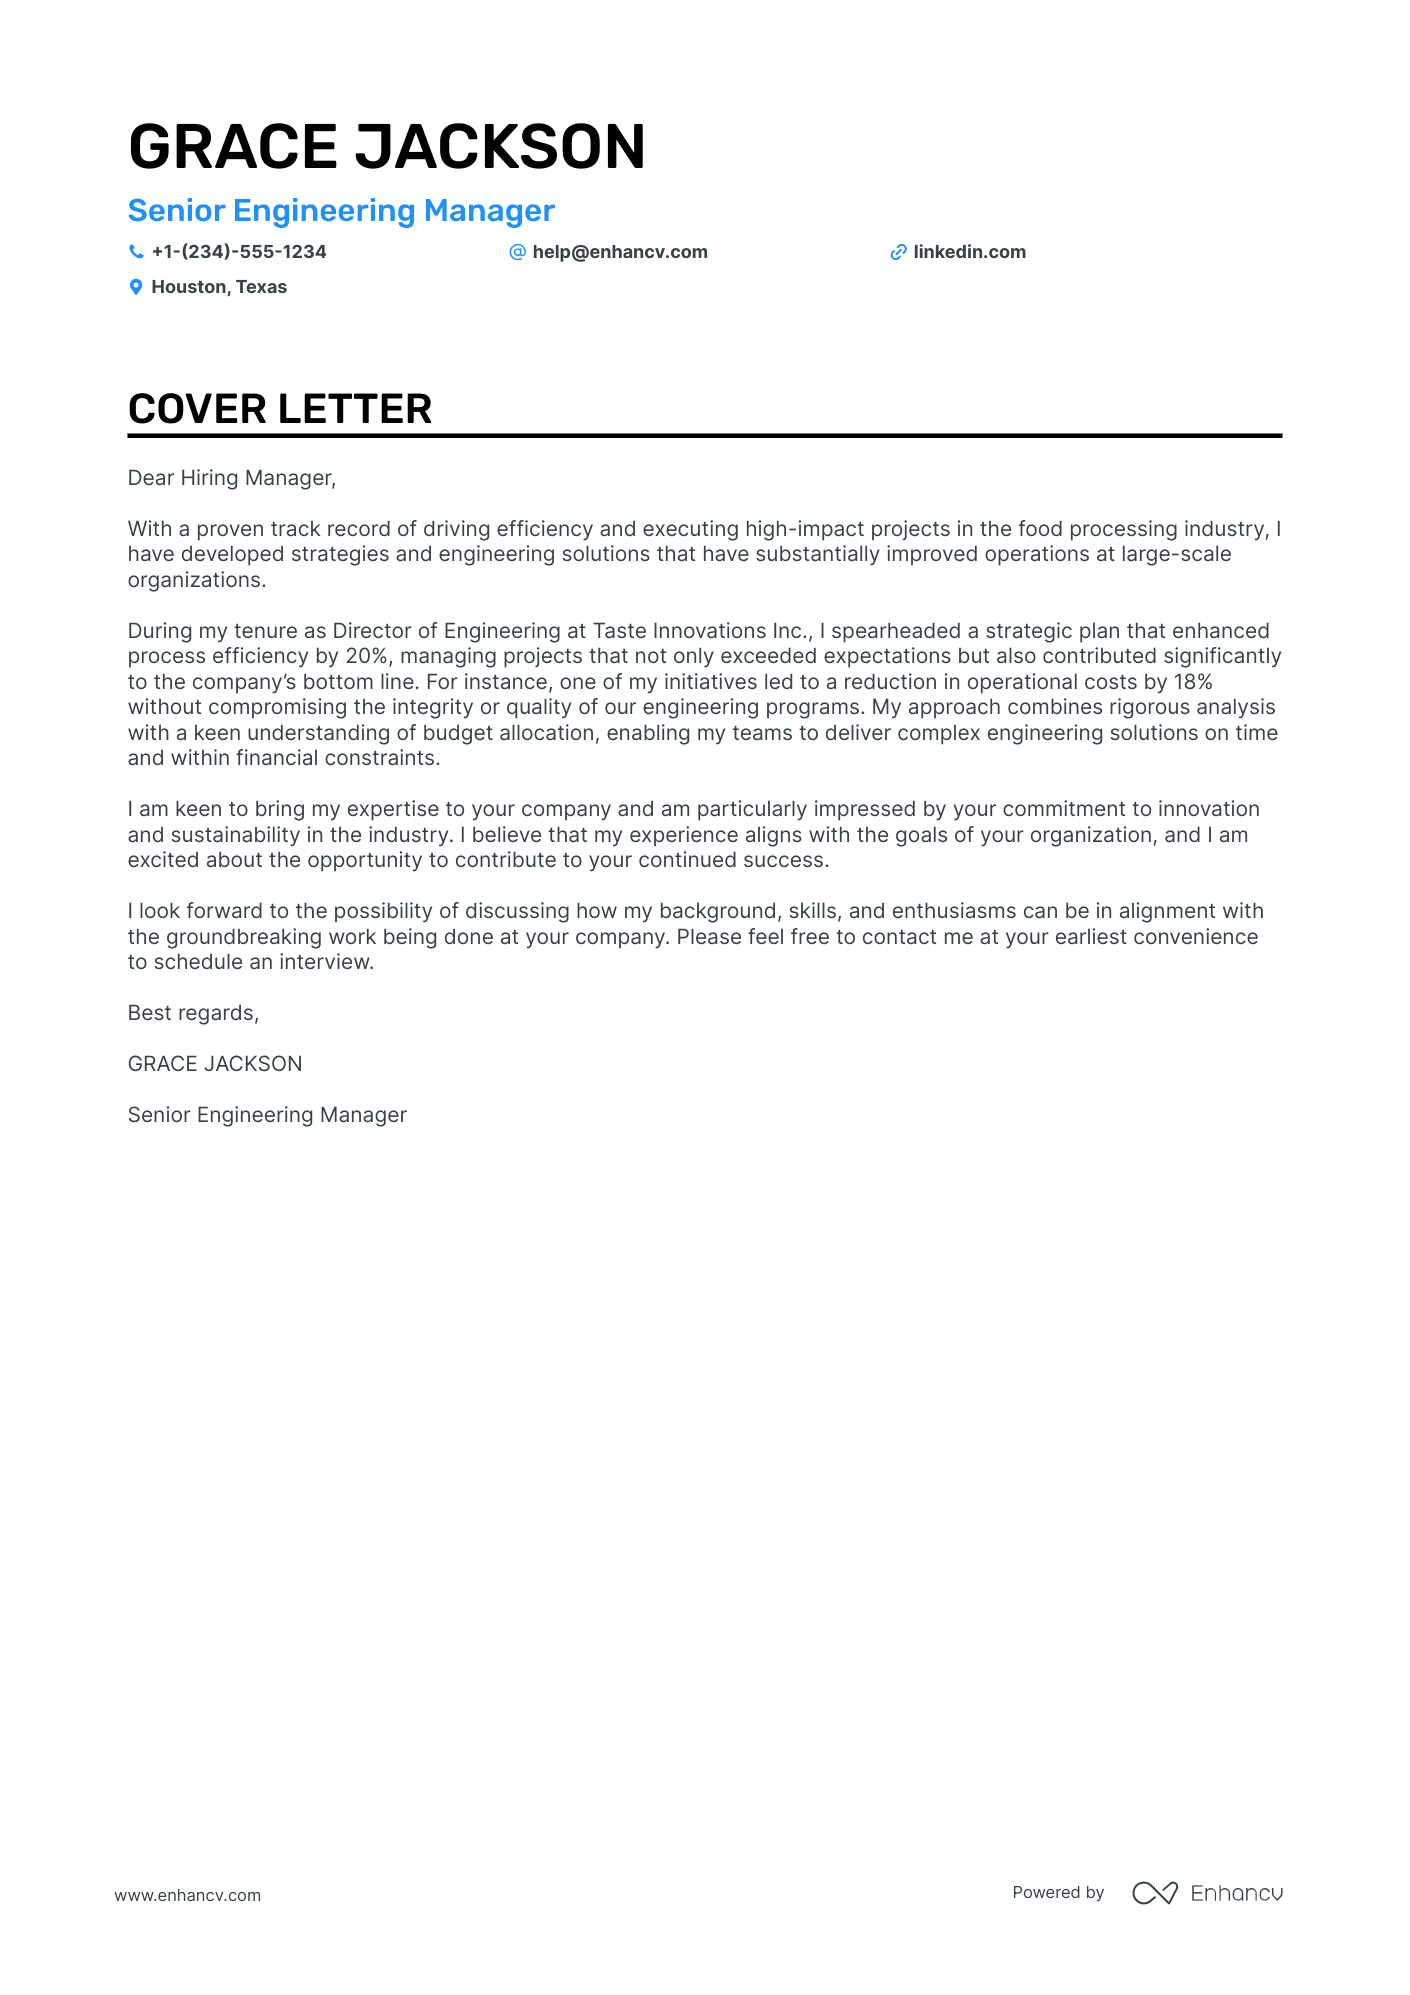 job application letter as a engineer